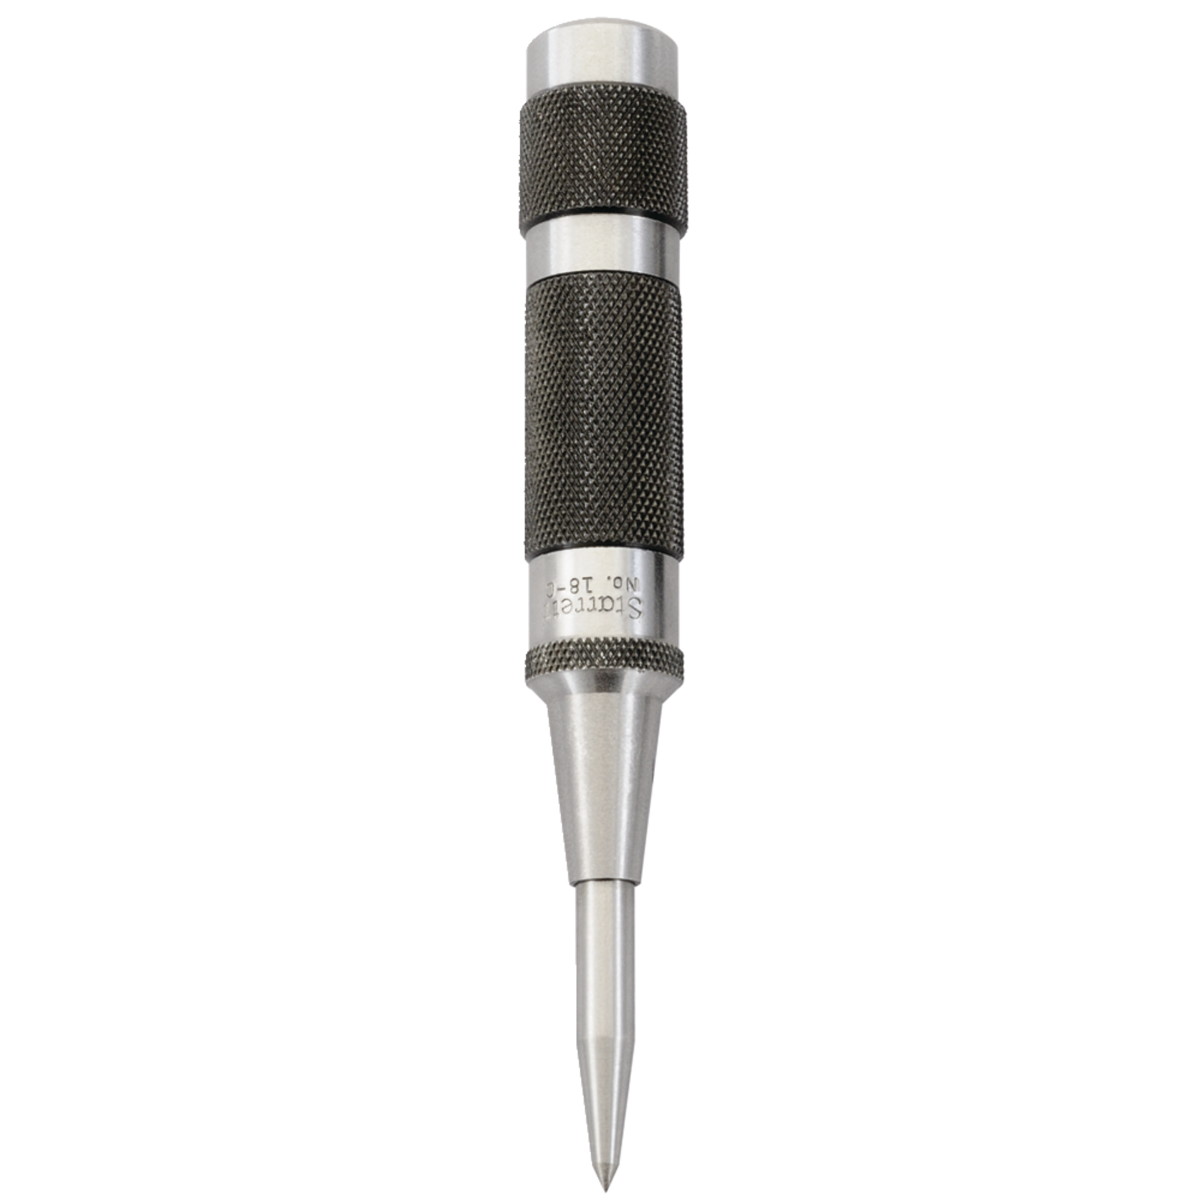 Starrett 18C 5.25 in. Long Automatic Center Punch